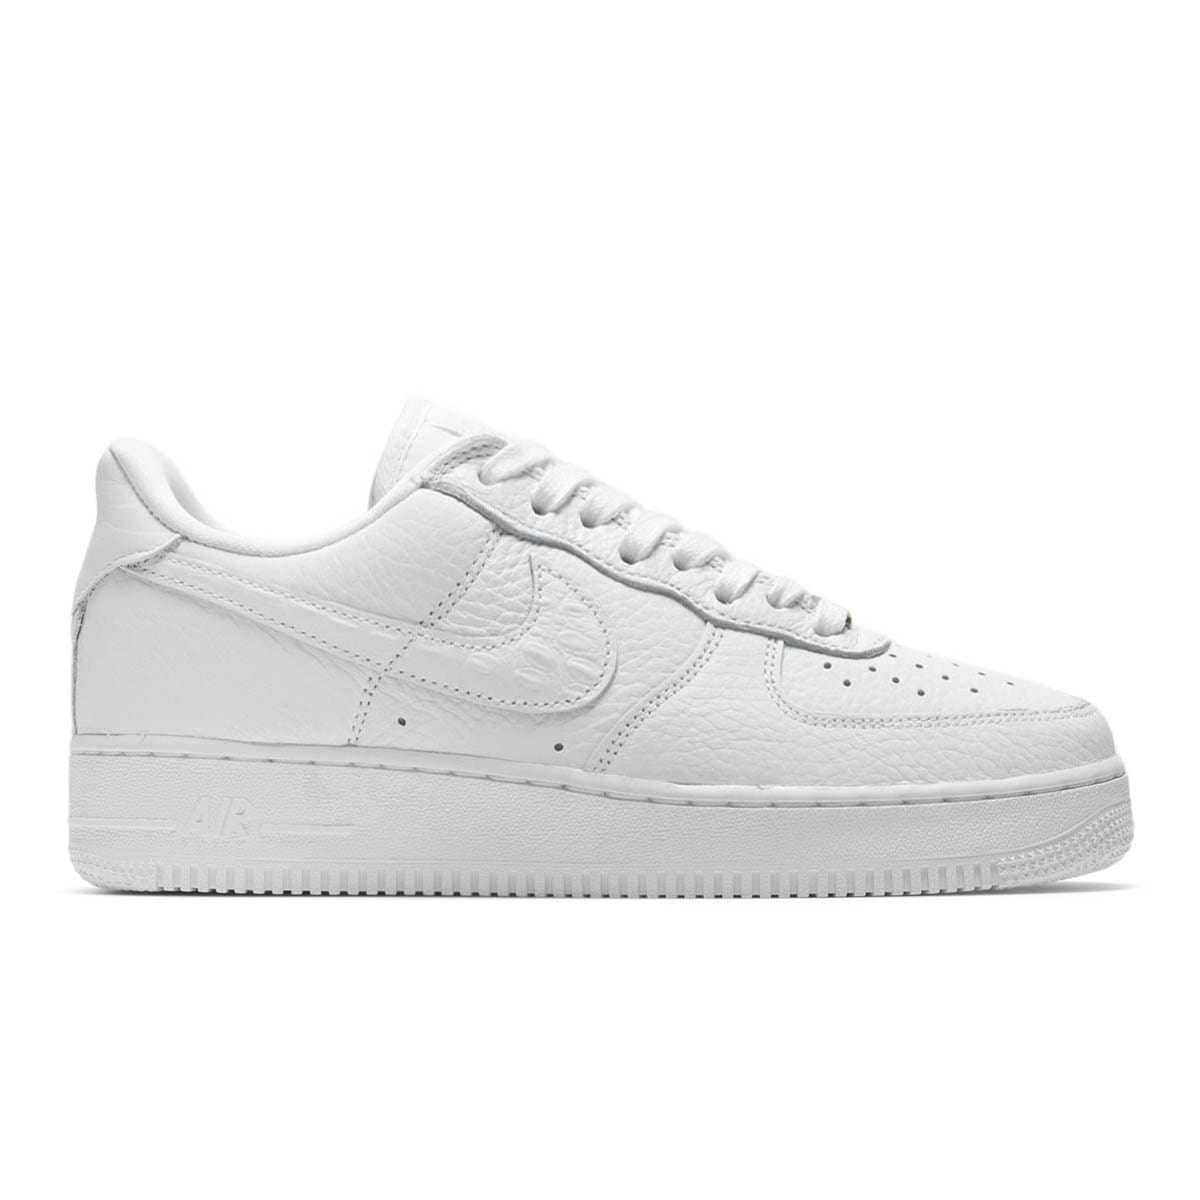 Air force 1 trainers Nike White size 41 EU in Plastic - 28108458